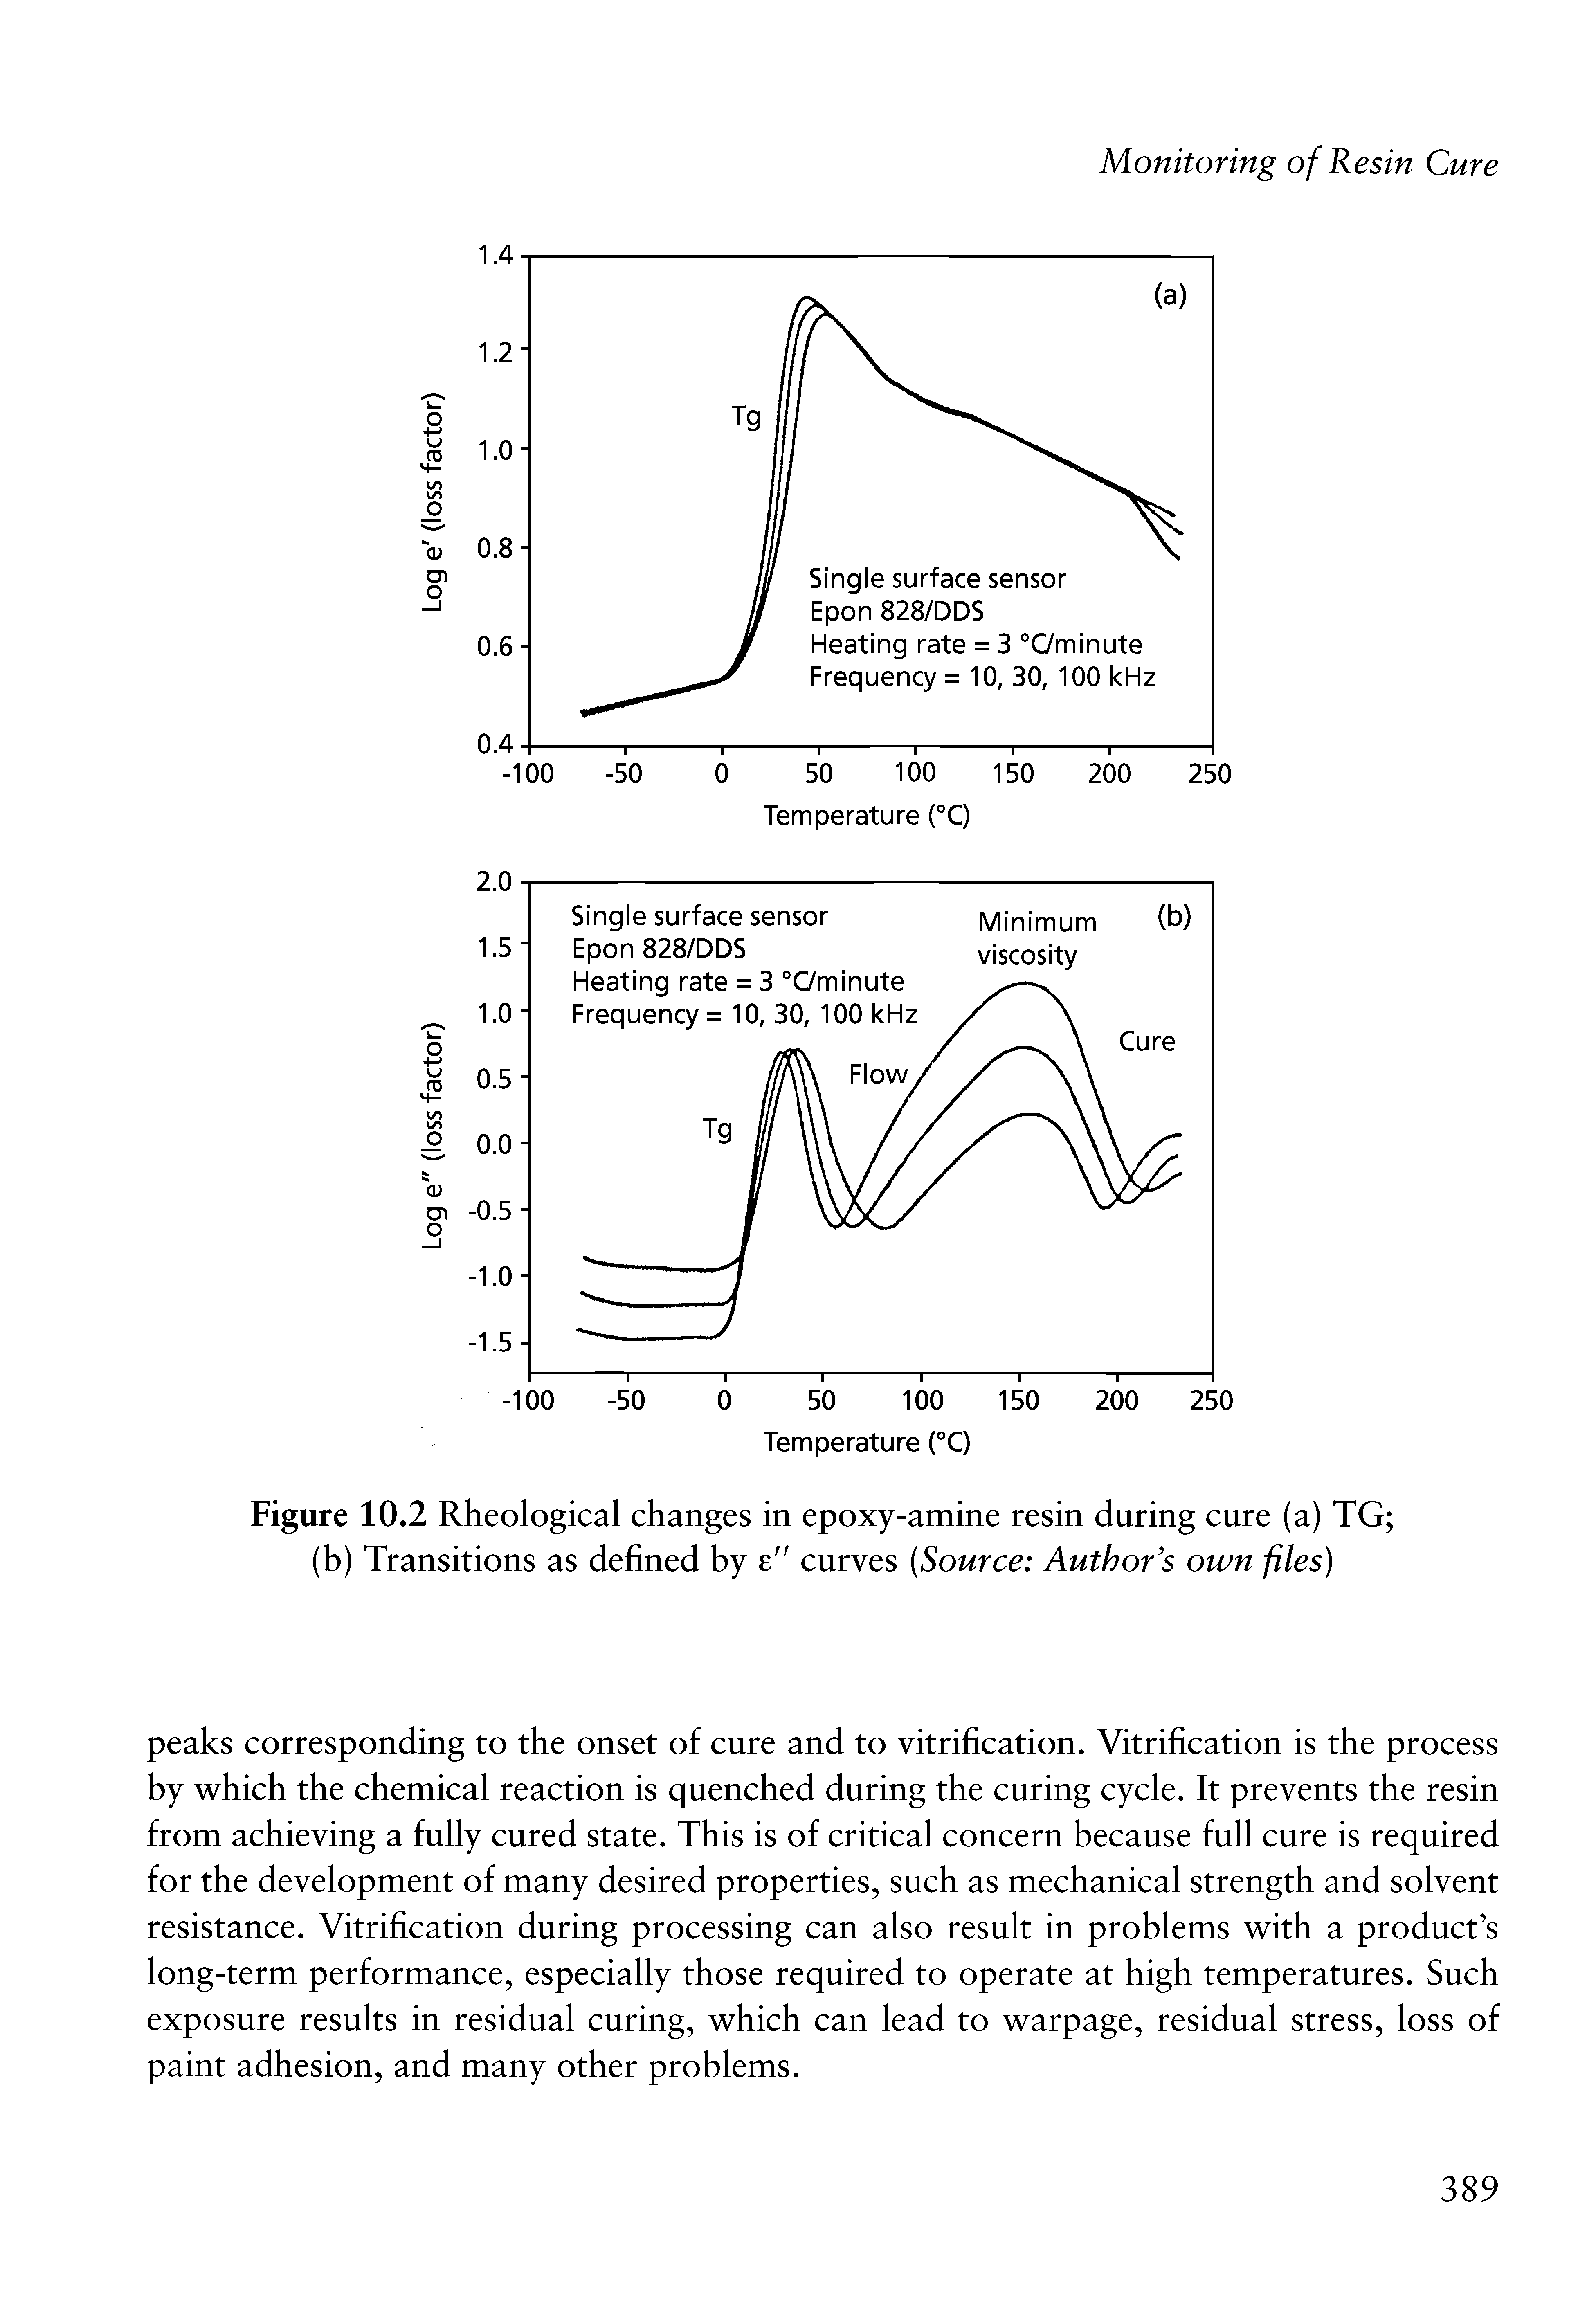 Figure 10.2 Rheological changes in epoxy-amine resin during cure (a) TG (b) Transitions as defined by e" curves Source Author s own files)...